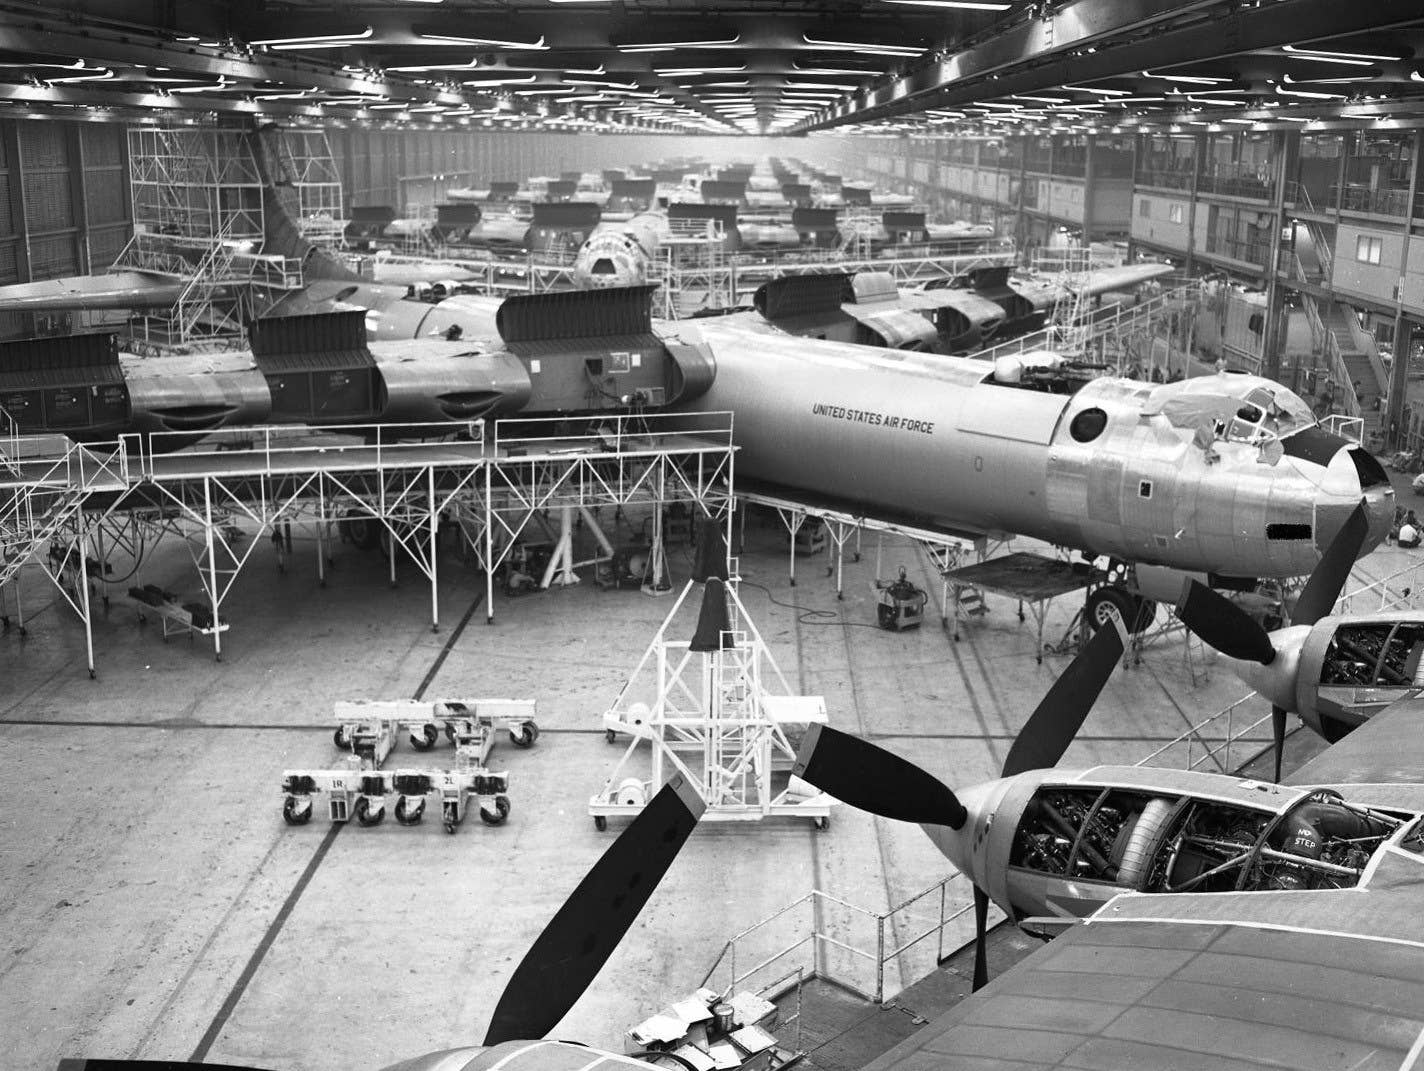 A seemingly endless line of B-36 bombers take shape on the Convair assembly line in 1951. Some aspects of the current acquisition cycle date back to the Cold War and are increasingly facing criticism from officials frustrated by the slow pace at which new technologies are adopted. <em>Tony Landis/U.S. Air Force</em>